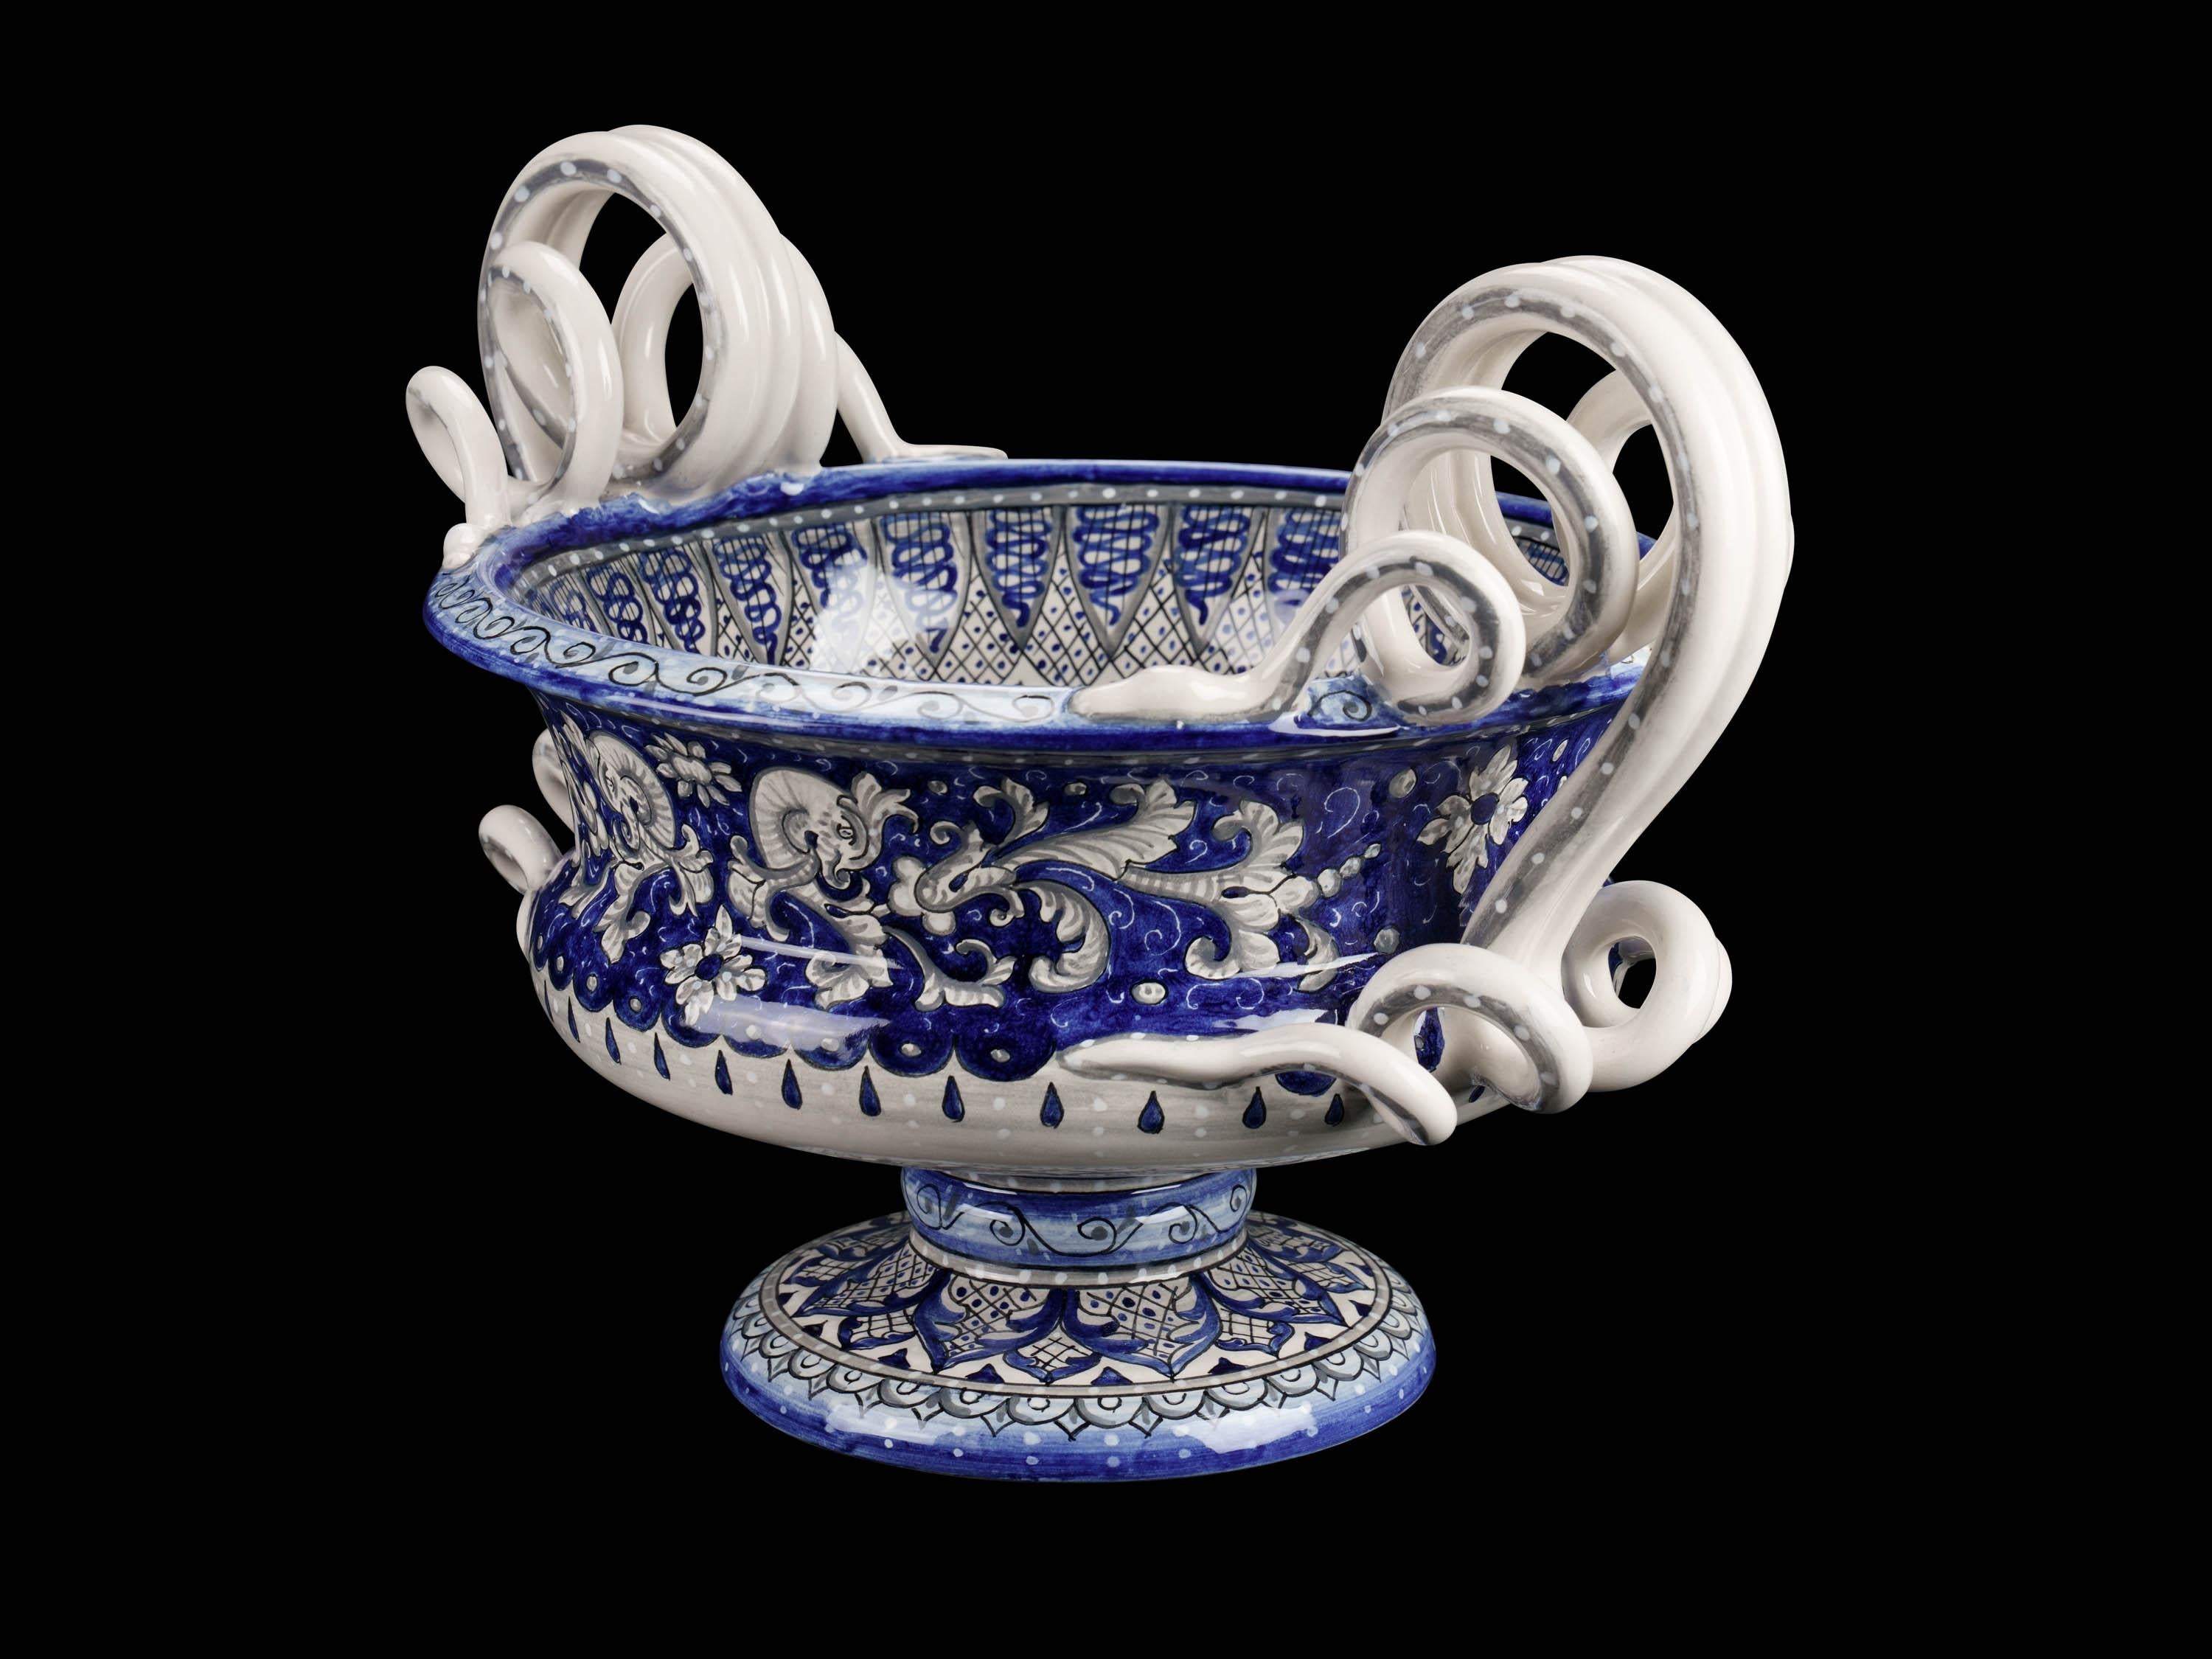 The lavish majolica centerpiece, in the shape of a krater, recalls the ancient structure of the Greek cup that was used to mix water and wine: this beautiful bowl is handmade and hand-painted in Italy, following the original Renaissance painting